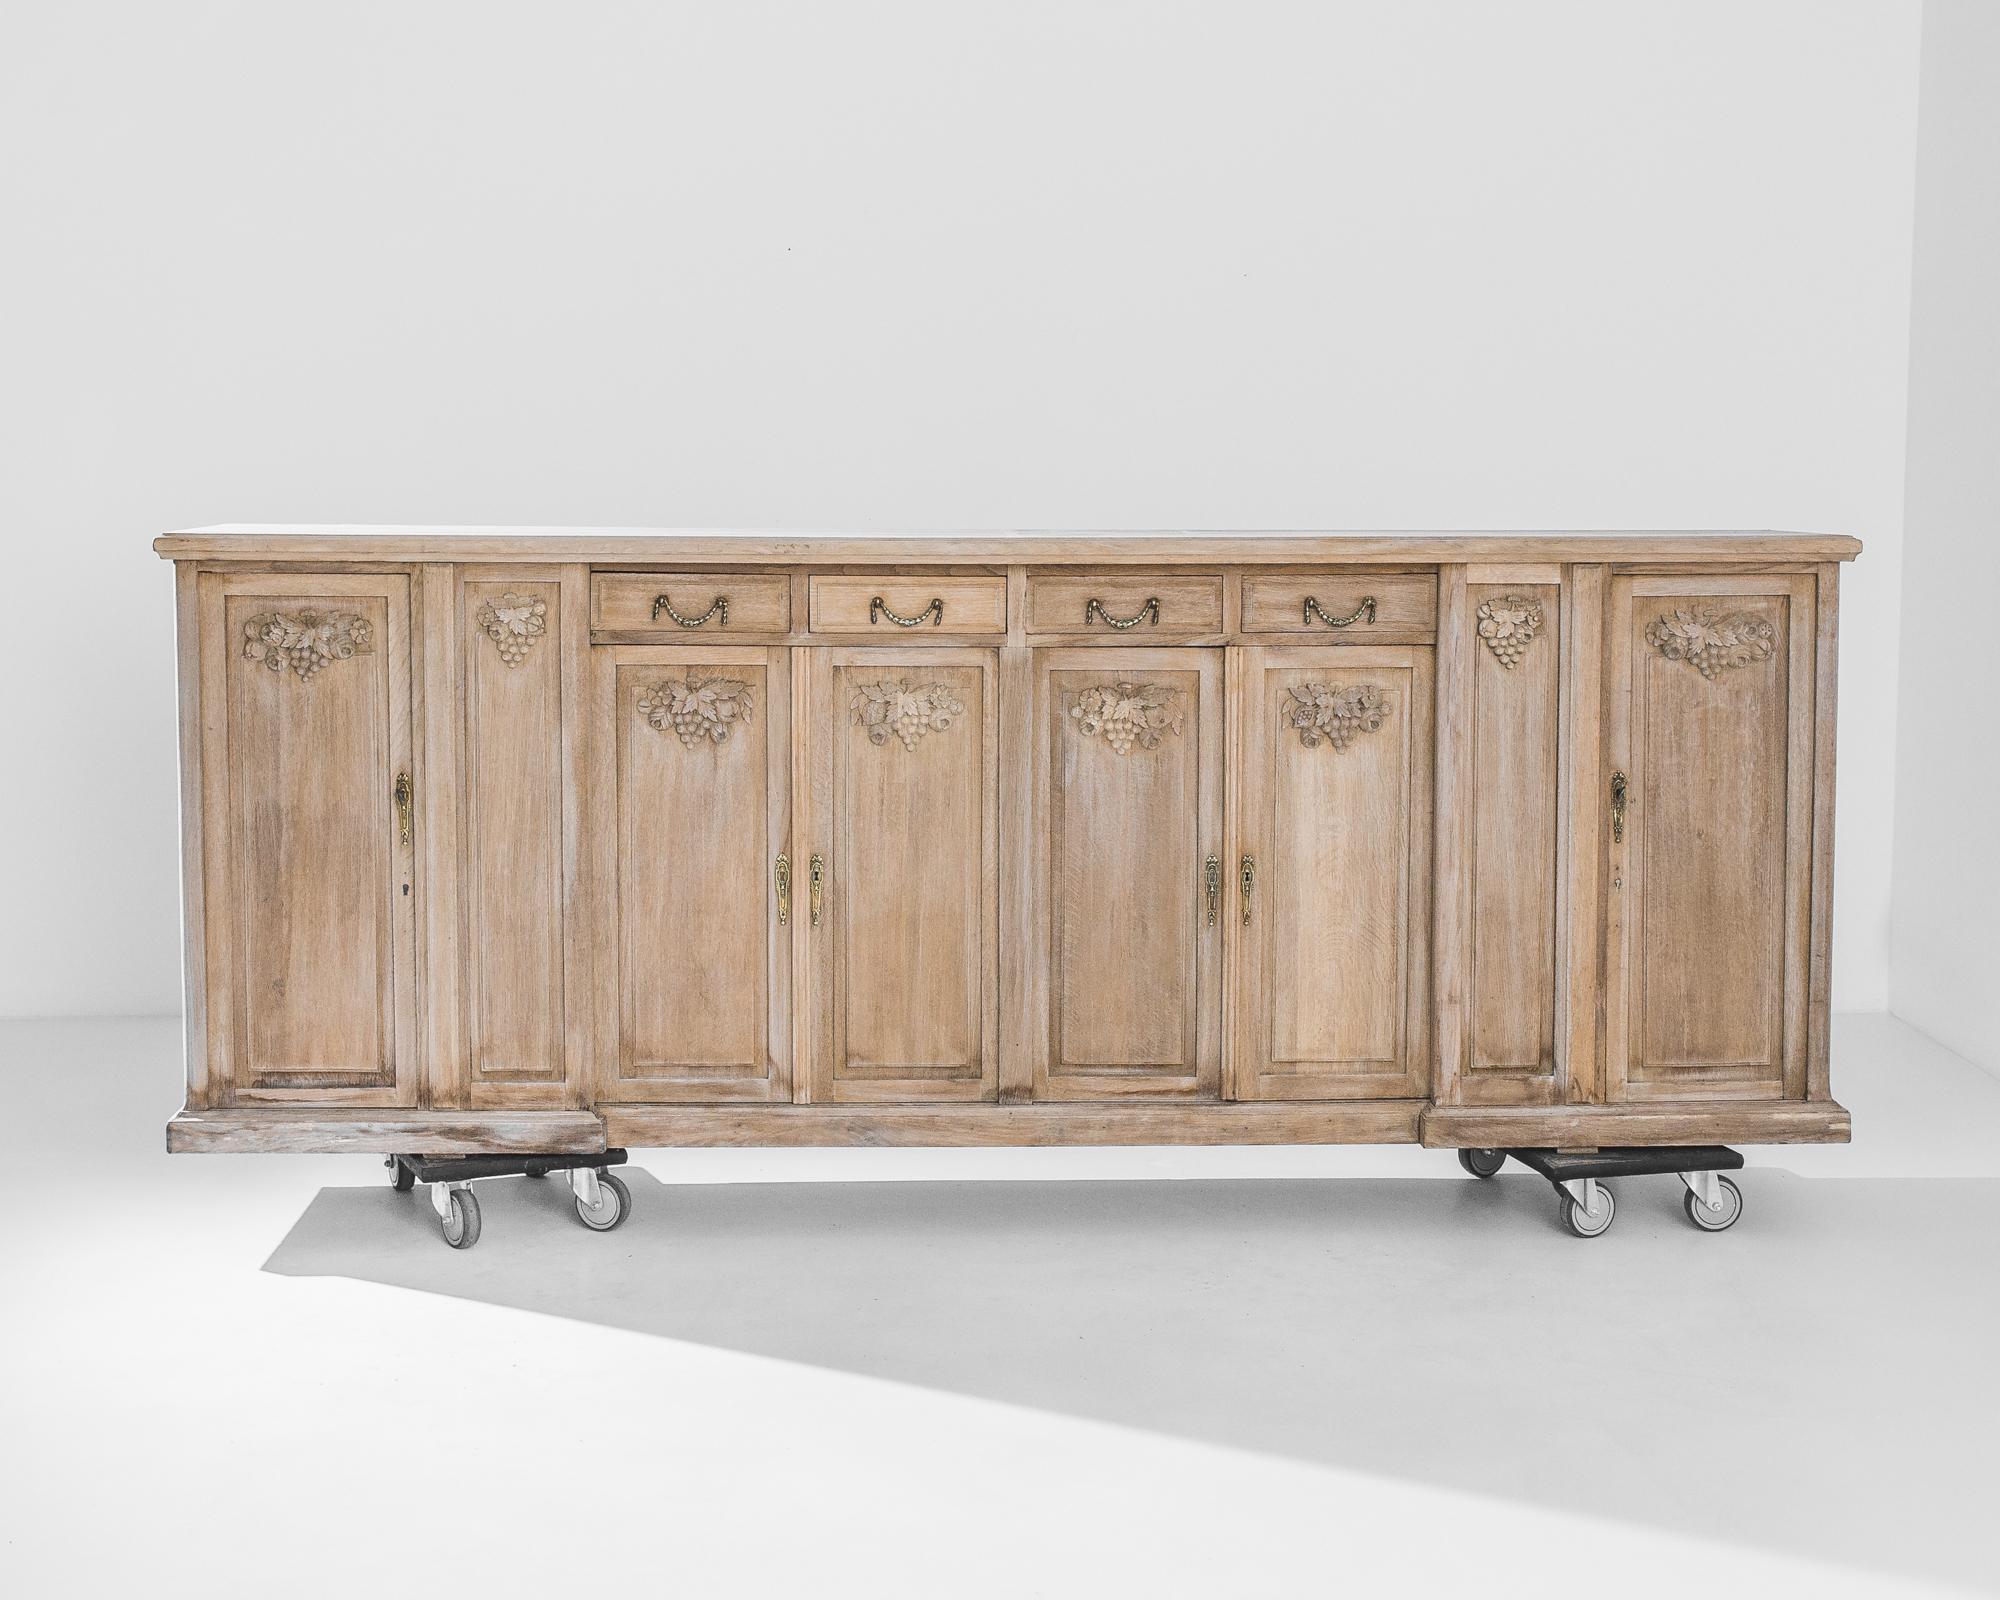 An oak cabinet from 1960s Belgium, embellished with nature morte style carvings. Each of the eight slender drawers is crowned by a carved motif of grapes, vine leaves, blowzy roses and ripe fruit: a toast to late summer abundance. The wood has been